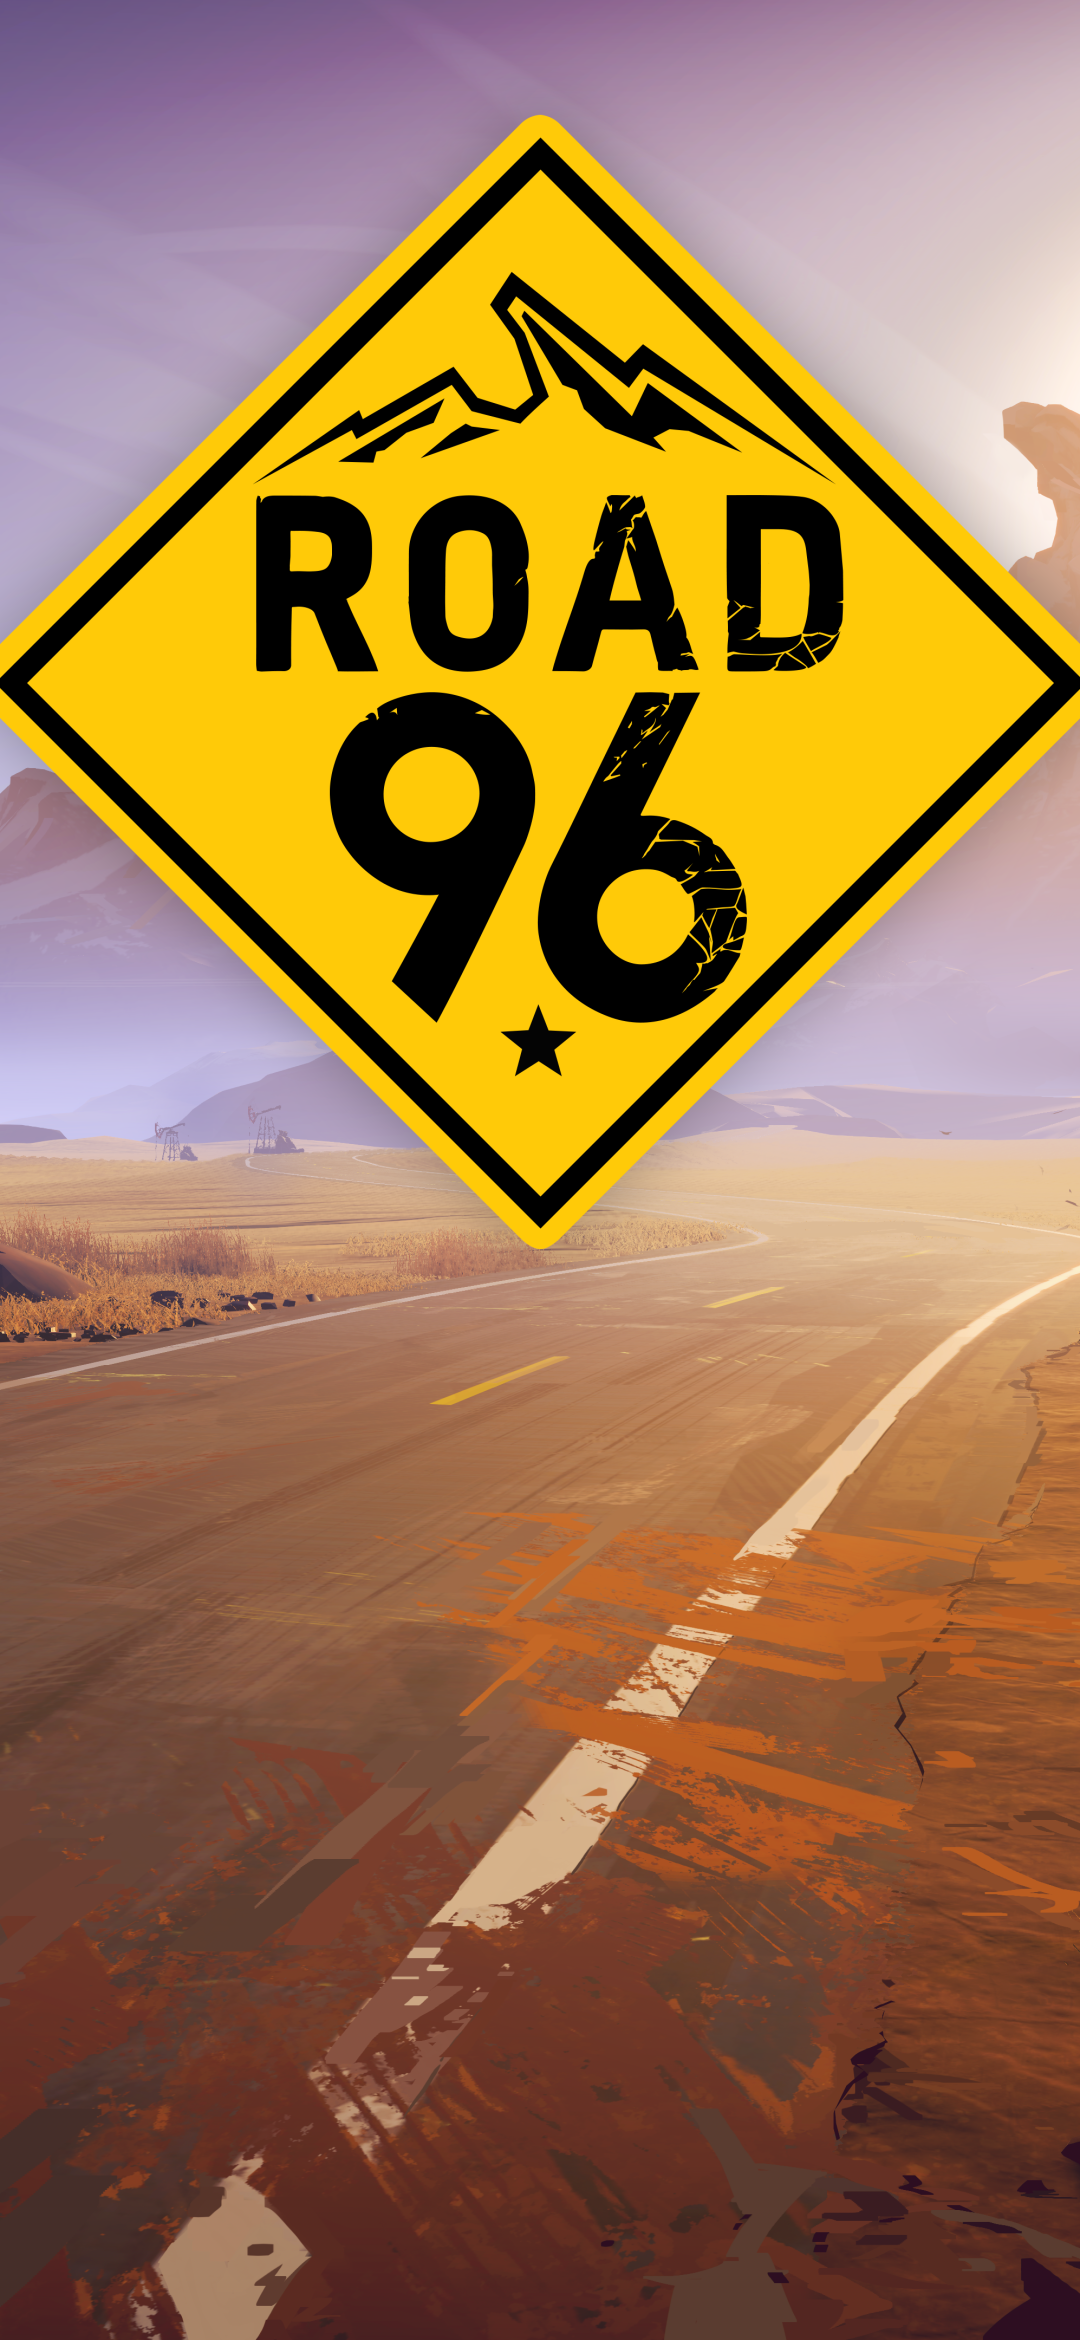 New Road 96 Game Wallpapers